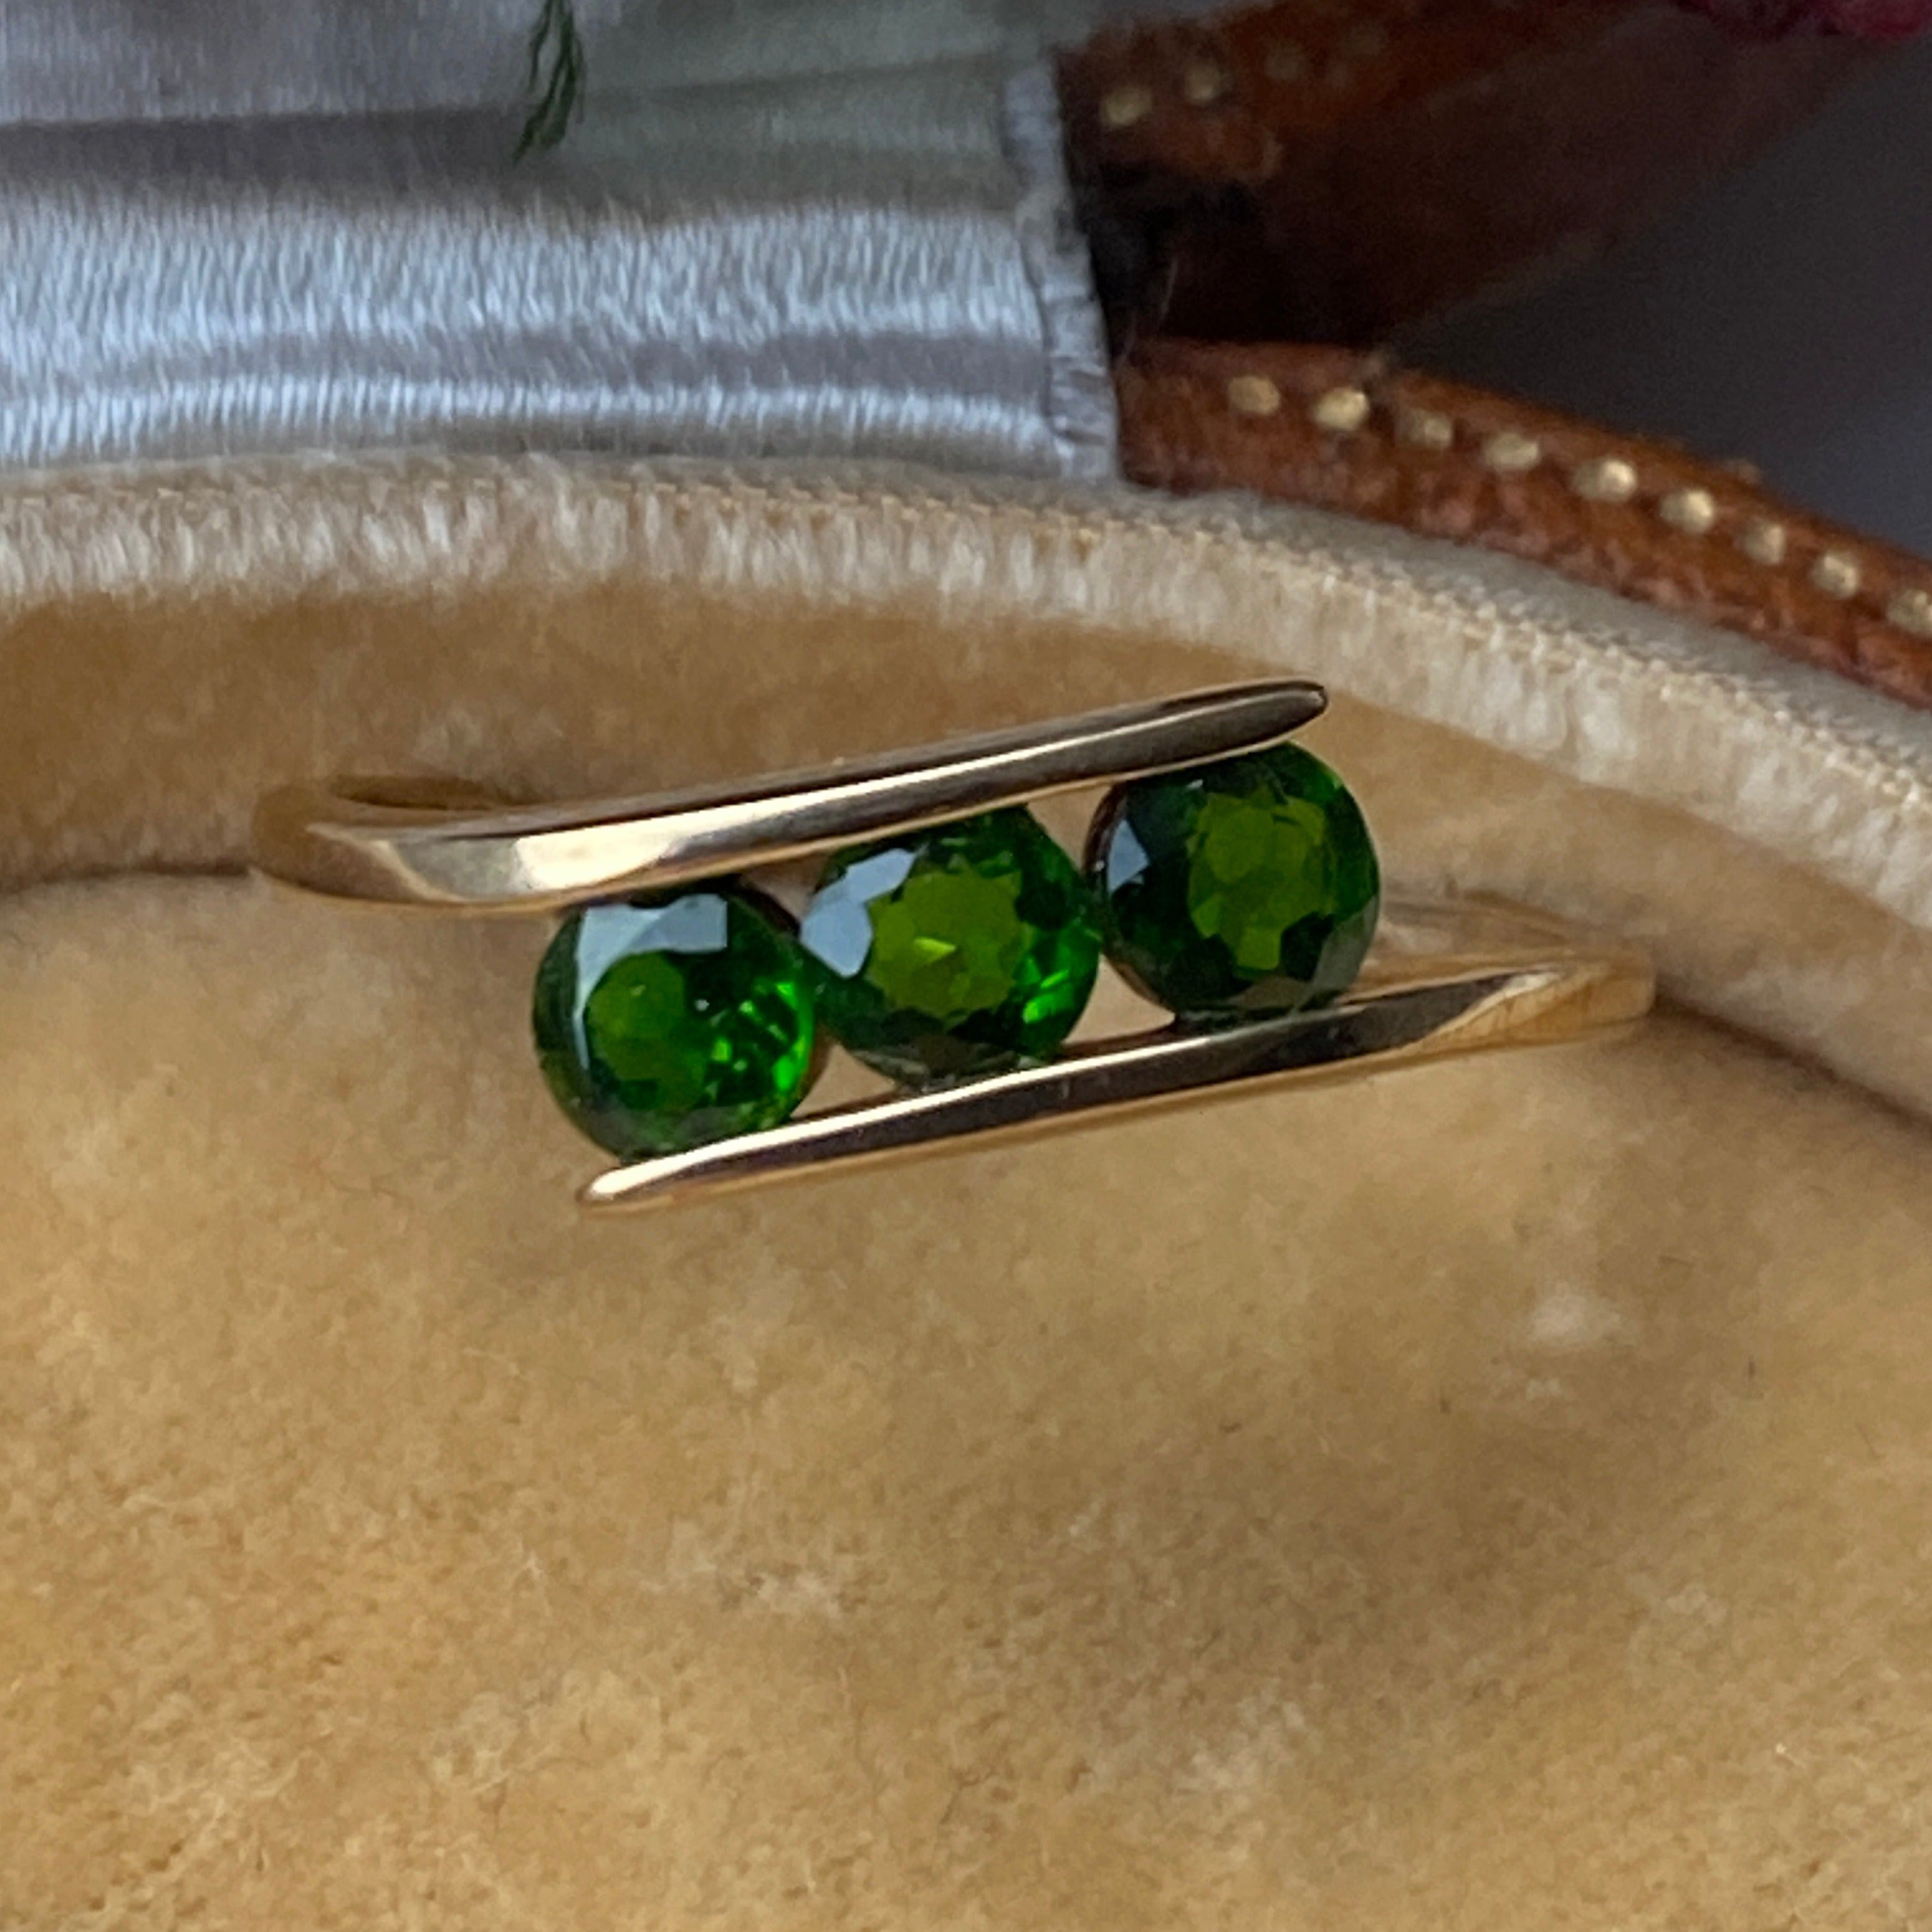 9ct Gold Diopside Trilogy Twist Ring Size T 1/2 or 10 US.